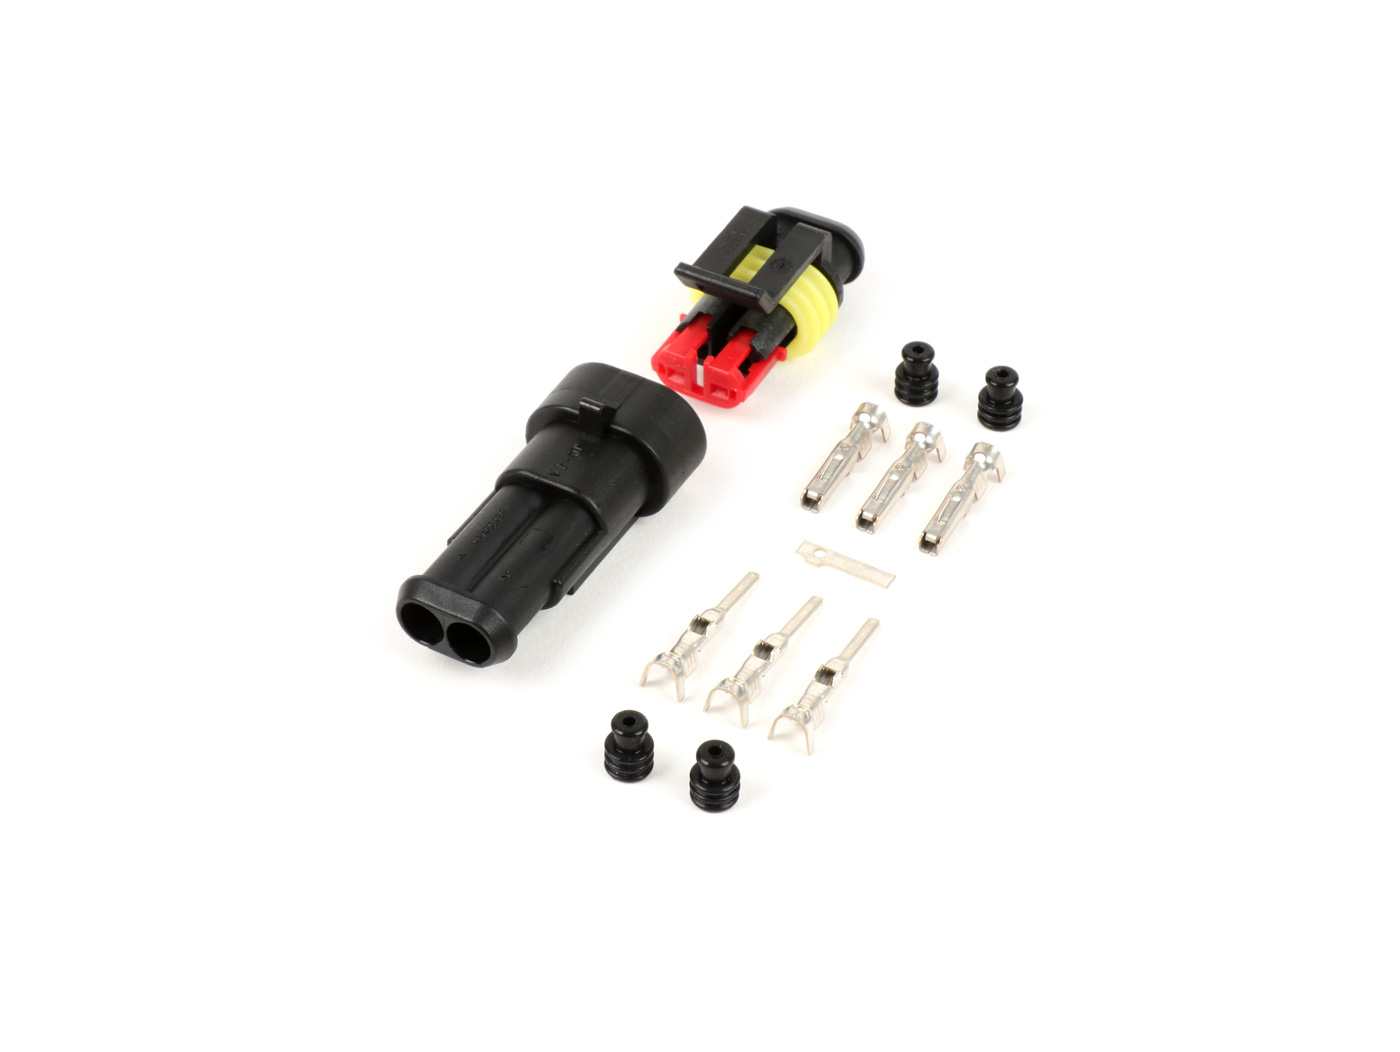 Plug Set For Wiring Harness -BGM PRO- Type Series 060 AM SpecialSeal, 0.85-1.25mm², Waterproof - 2 Contact Plugs